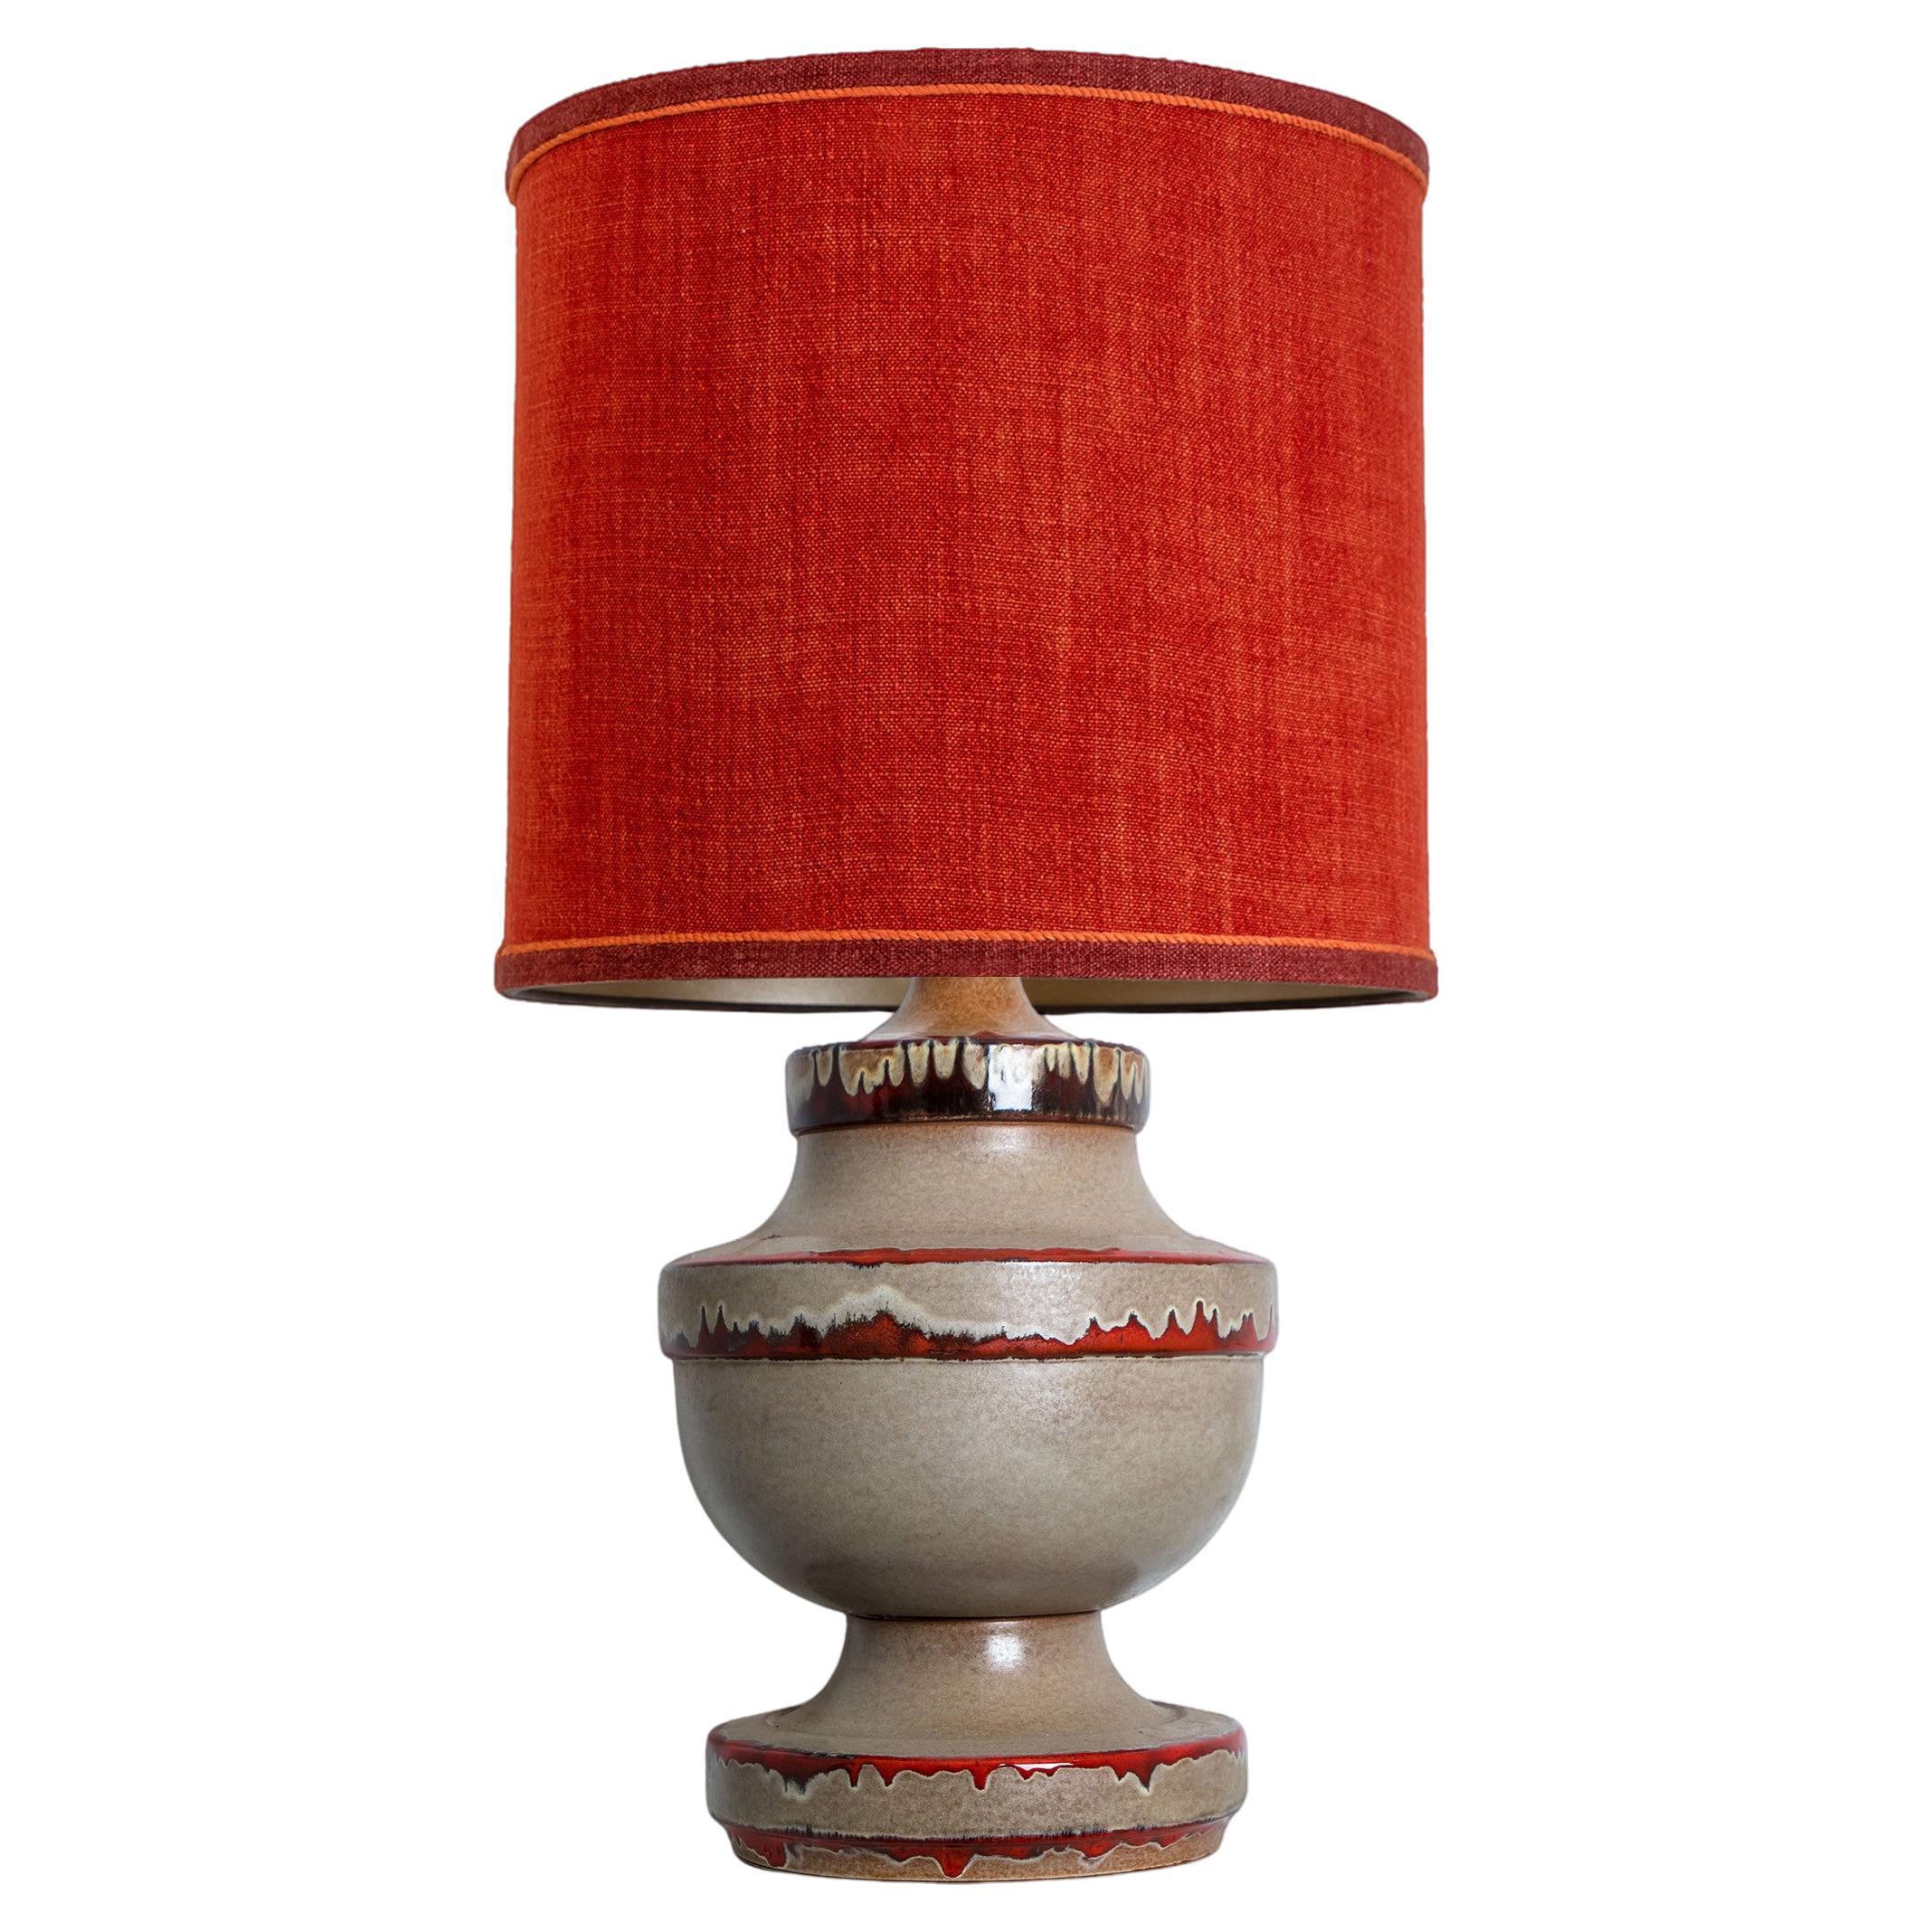 Large Red Taupe Ceramic Table Lamp, Germany